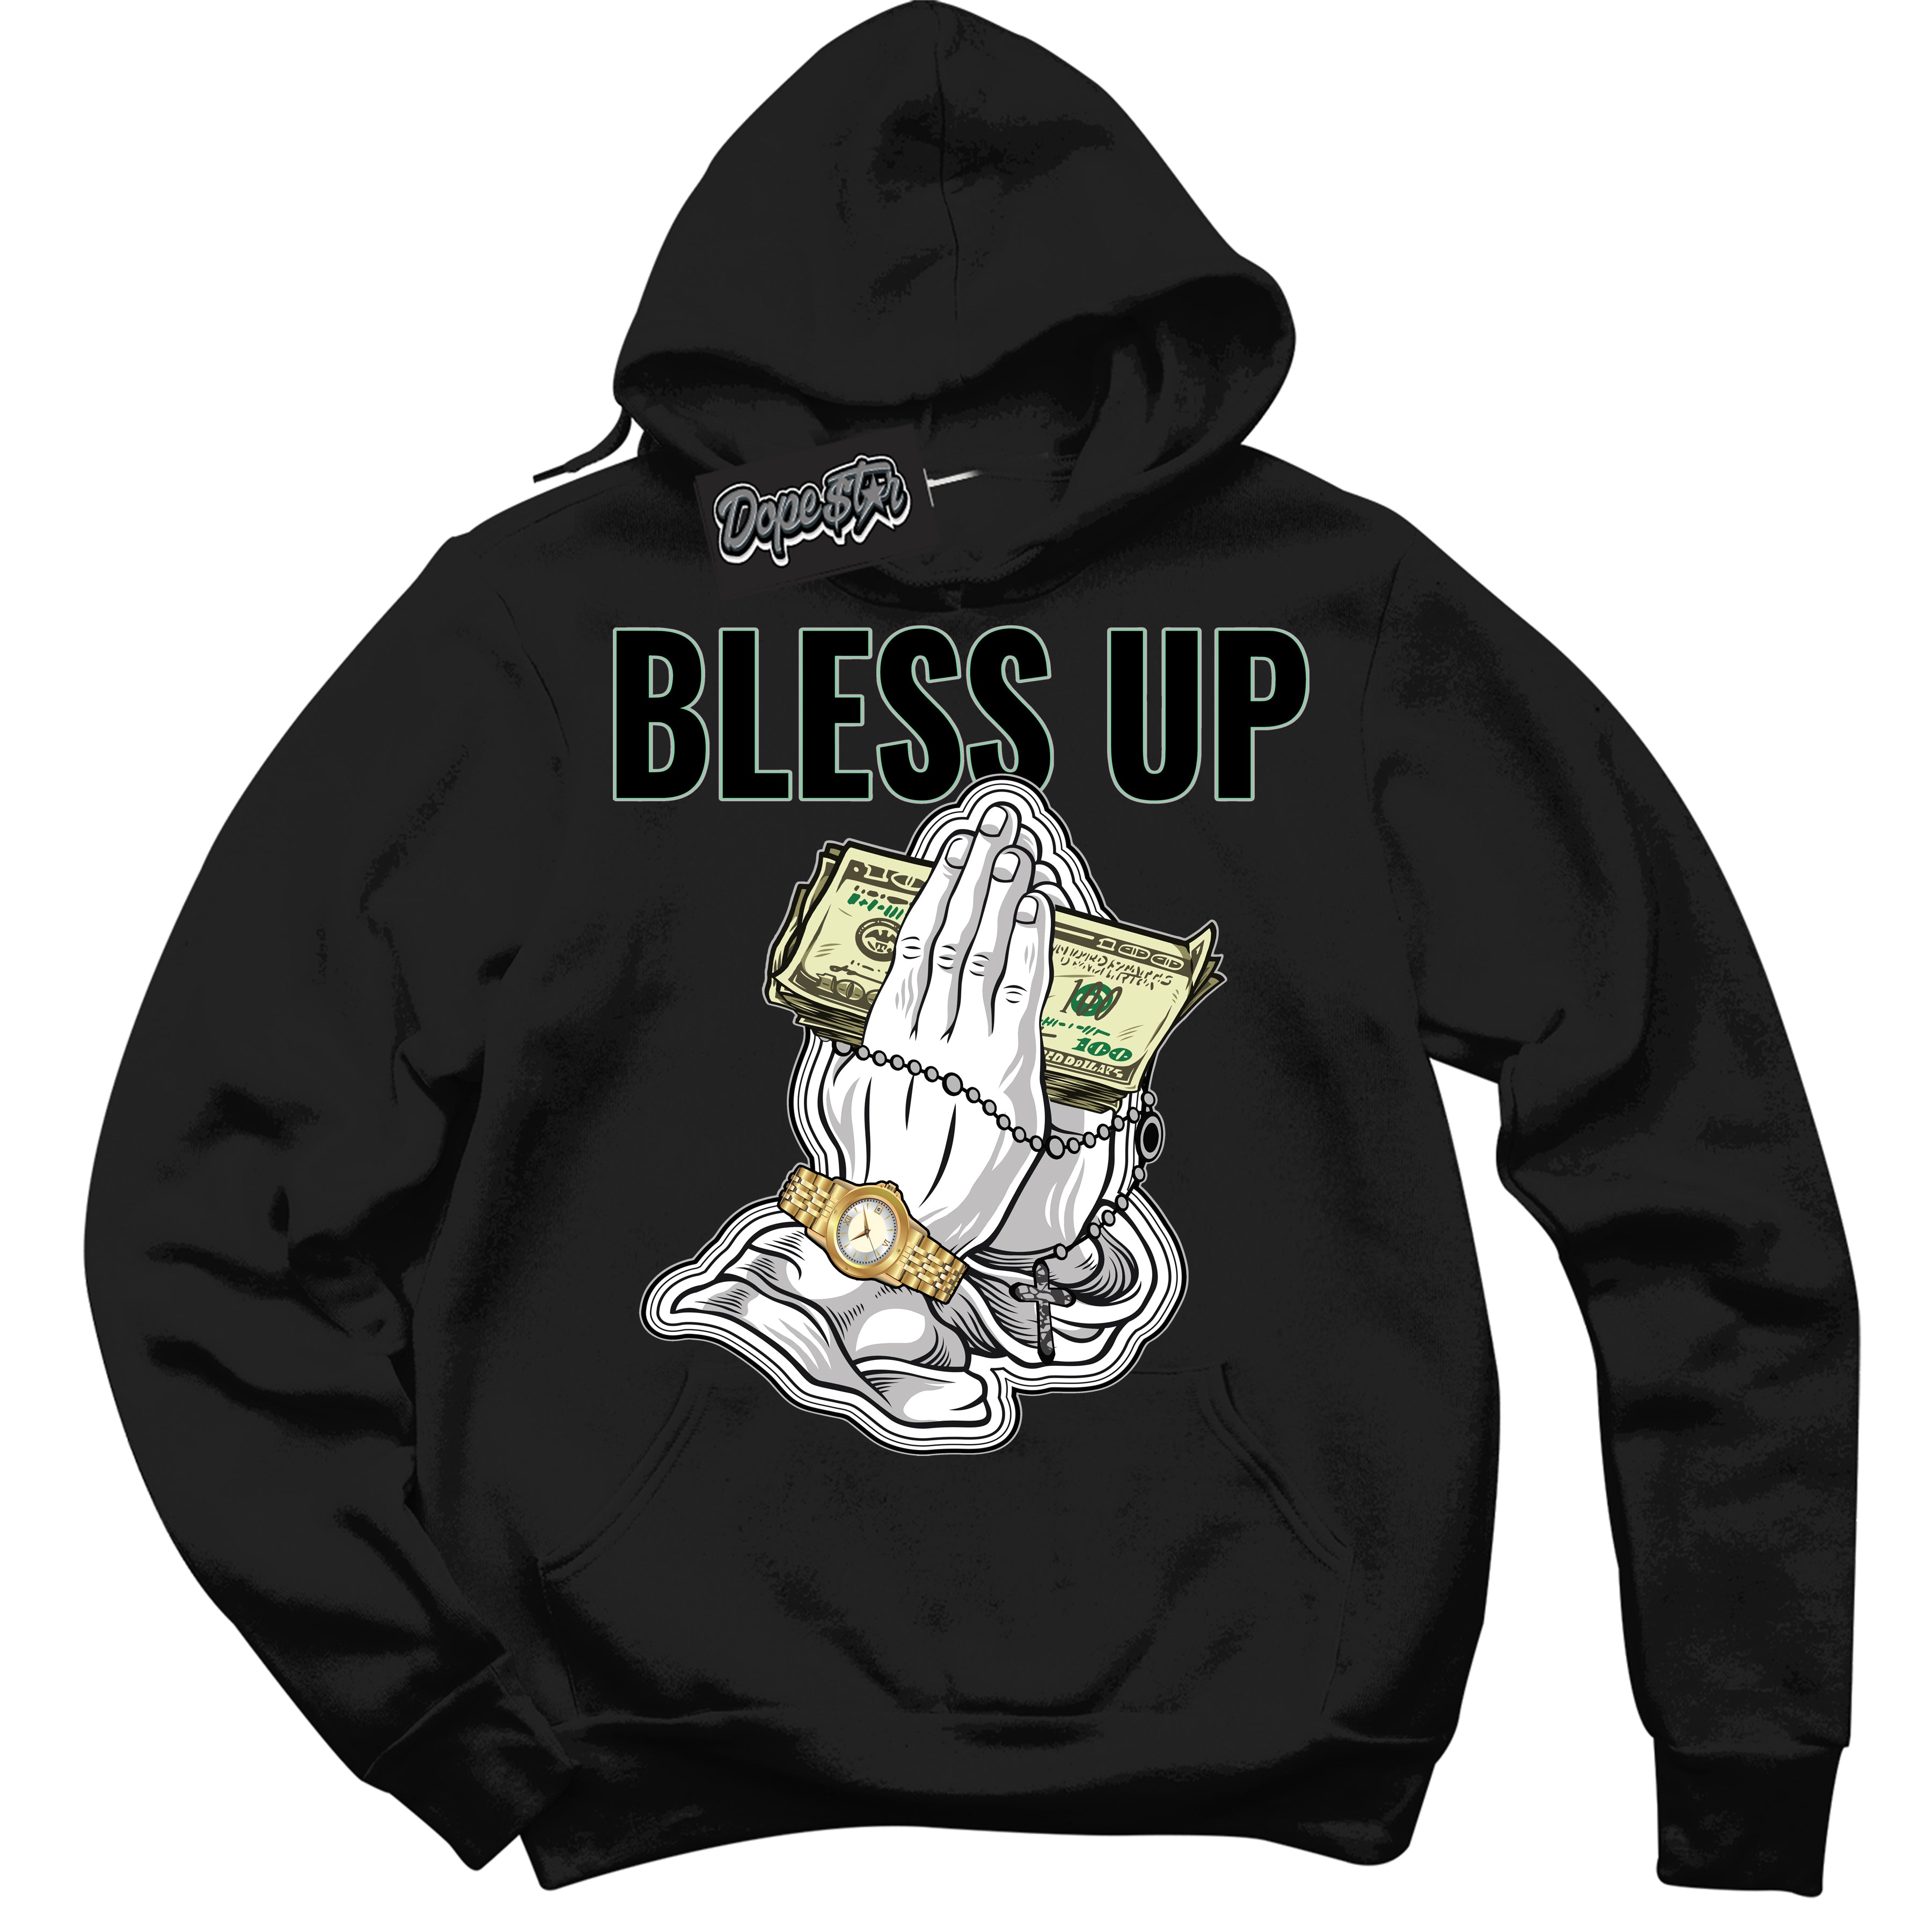 Cool Black Graphic DopeStar Hoodie with “ Bless Up “ print, that perfectly matches Green Glow 3S sneakers